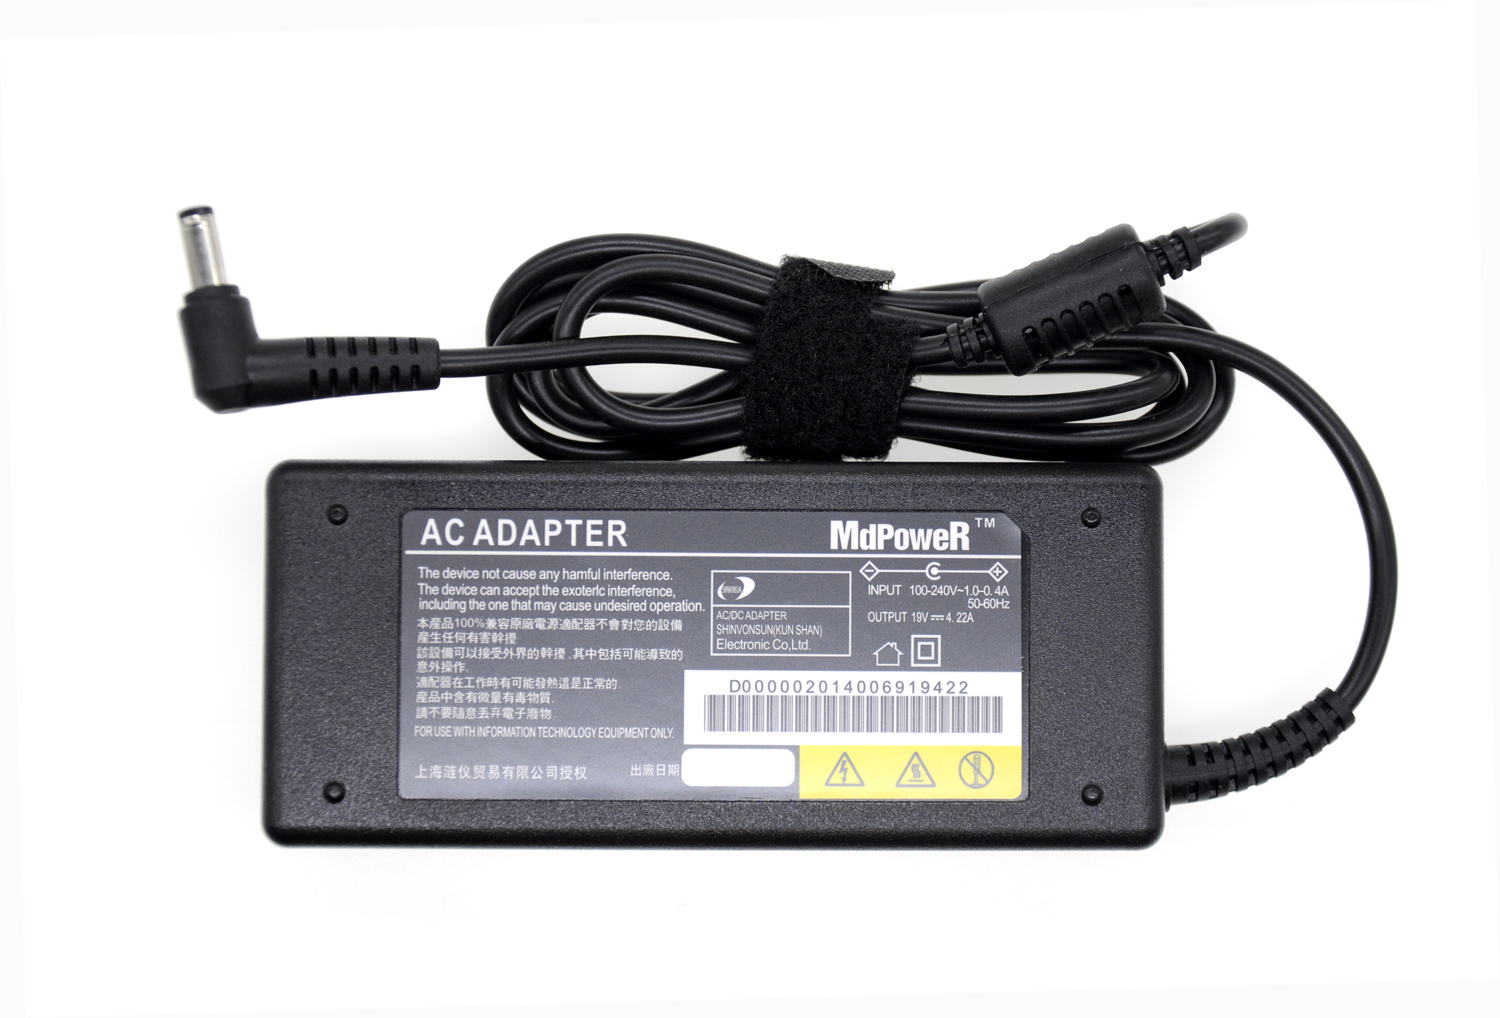 For Fujitsu S6421 S6510E S6520 S7010 S7011 S7021 S7025 S710 S7111 S752 S792 S904 laptop power supply AC adapter charger 19V4.22A